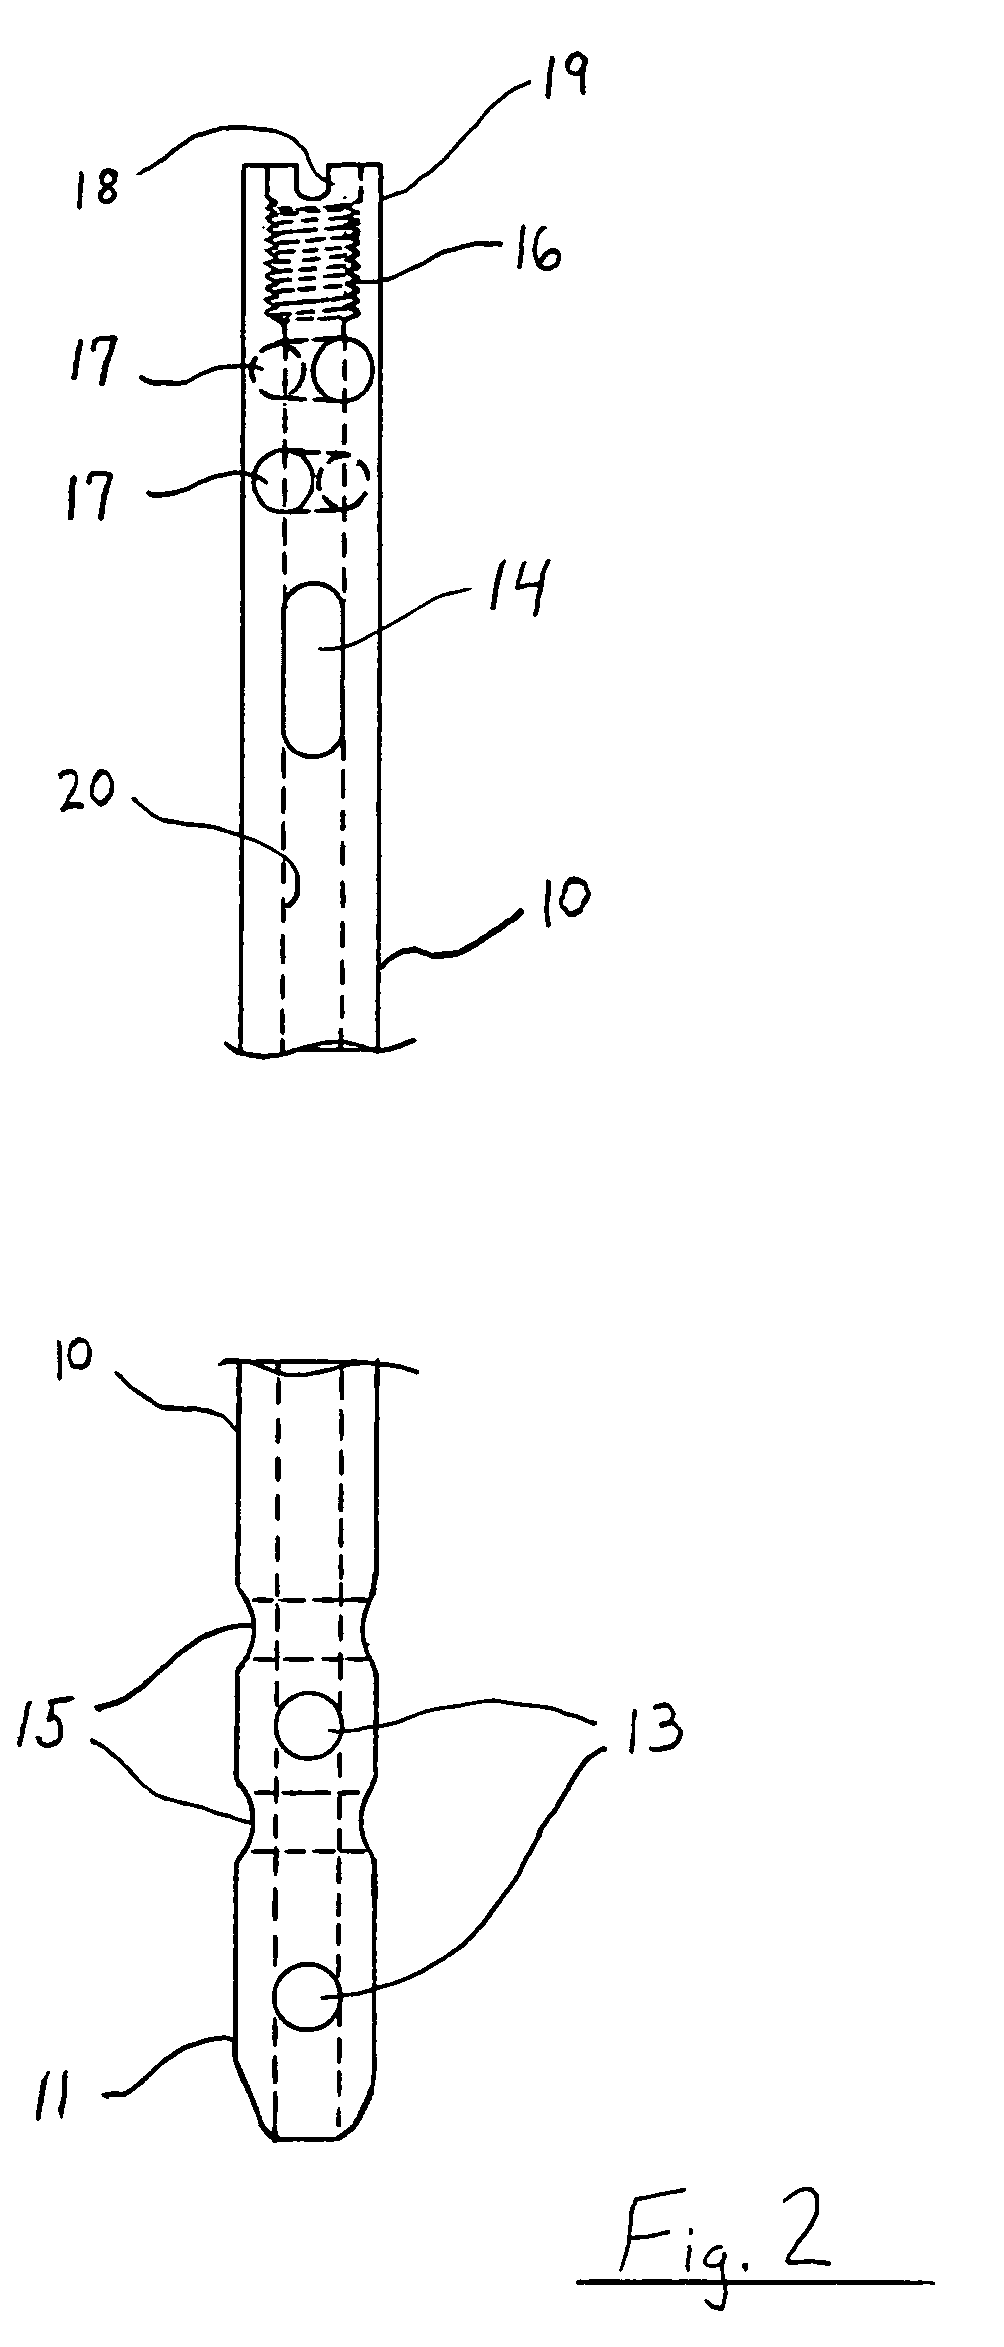 Method and system for securing an intramedullary nail